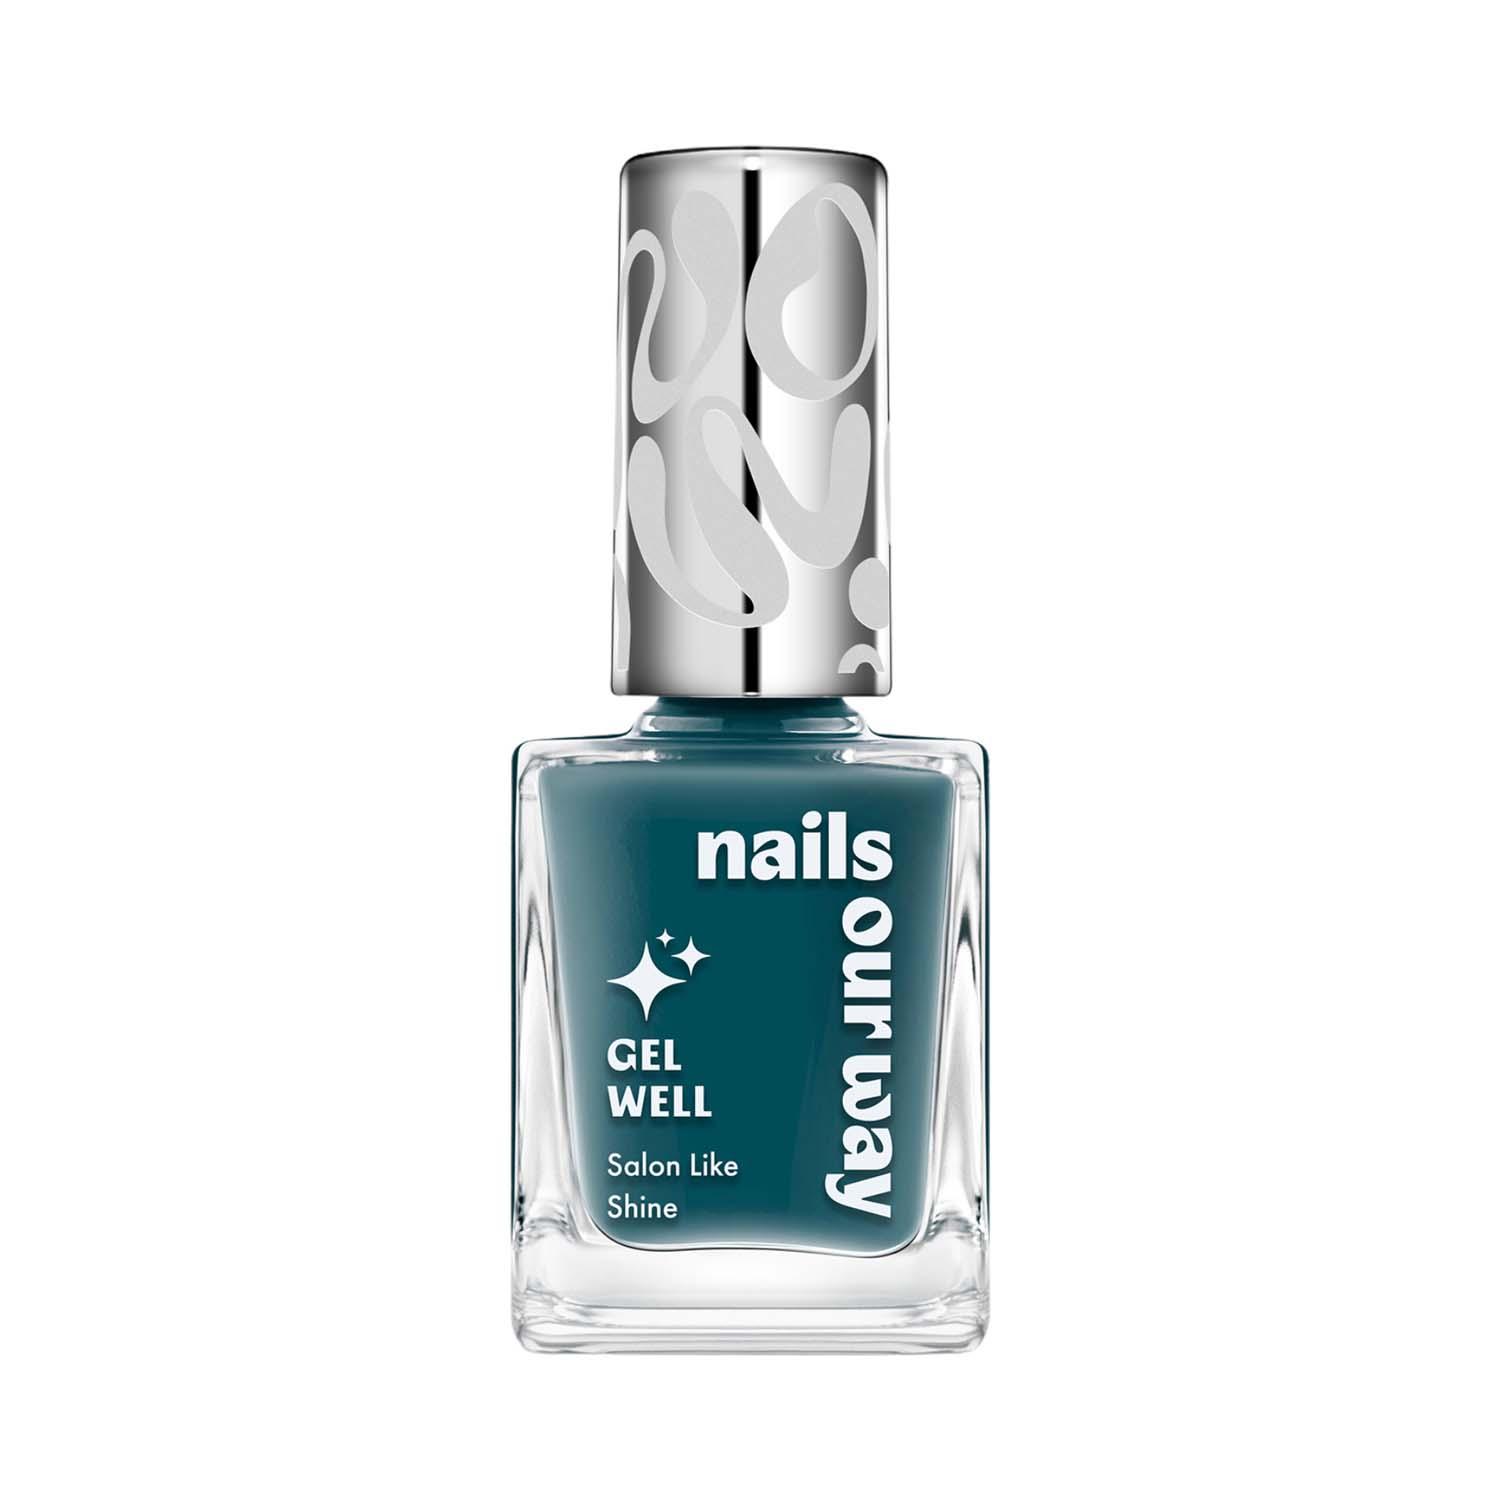 Nails Our Way | Nails Our Way Gel Well Nail Enamel - 407 Dynamic (10 ml)